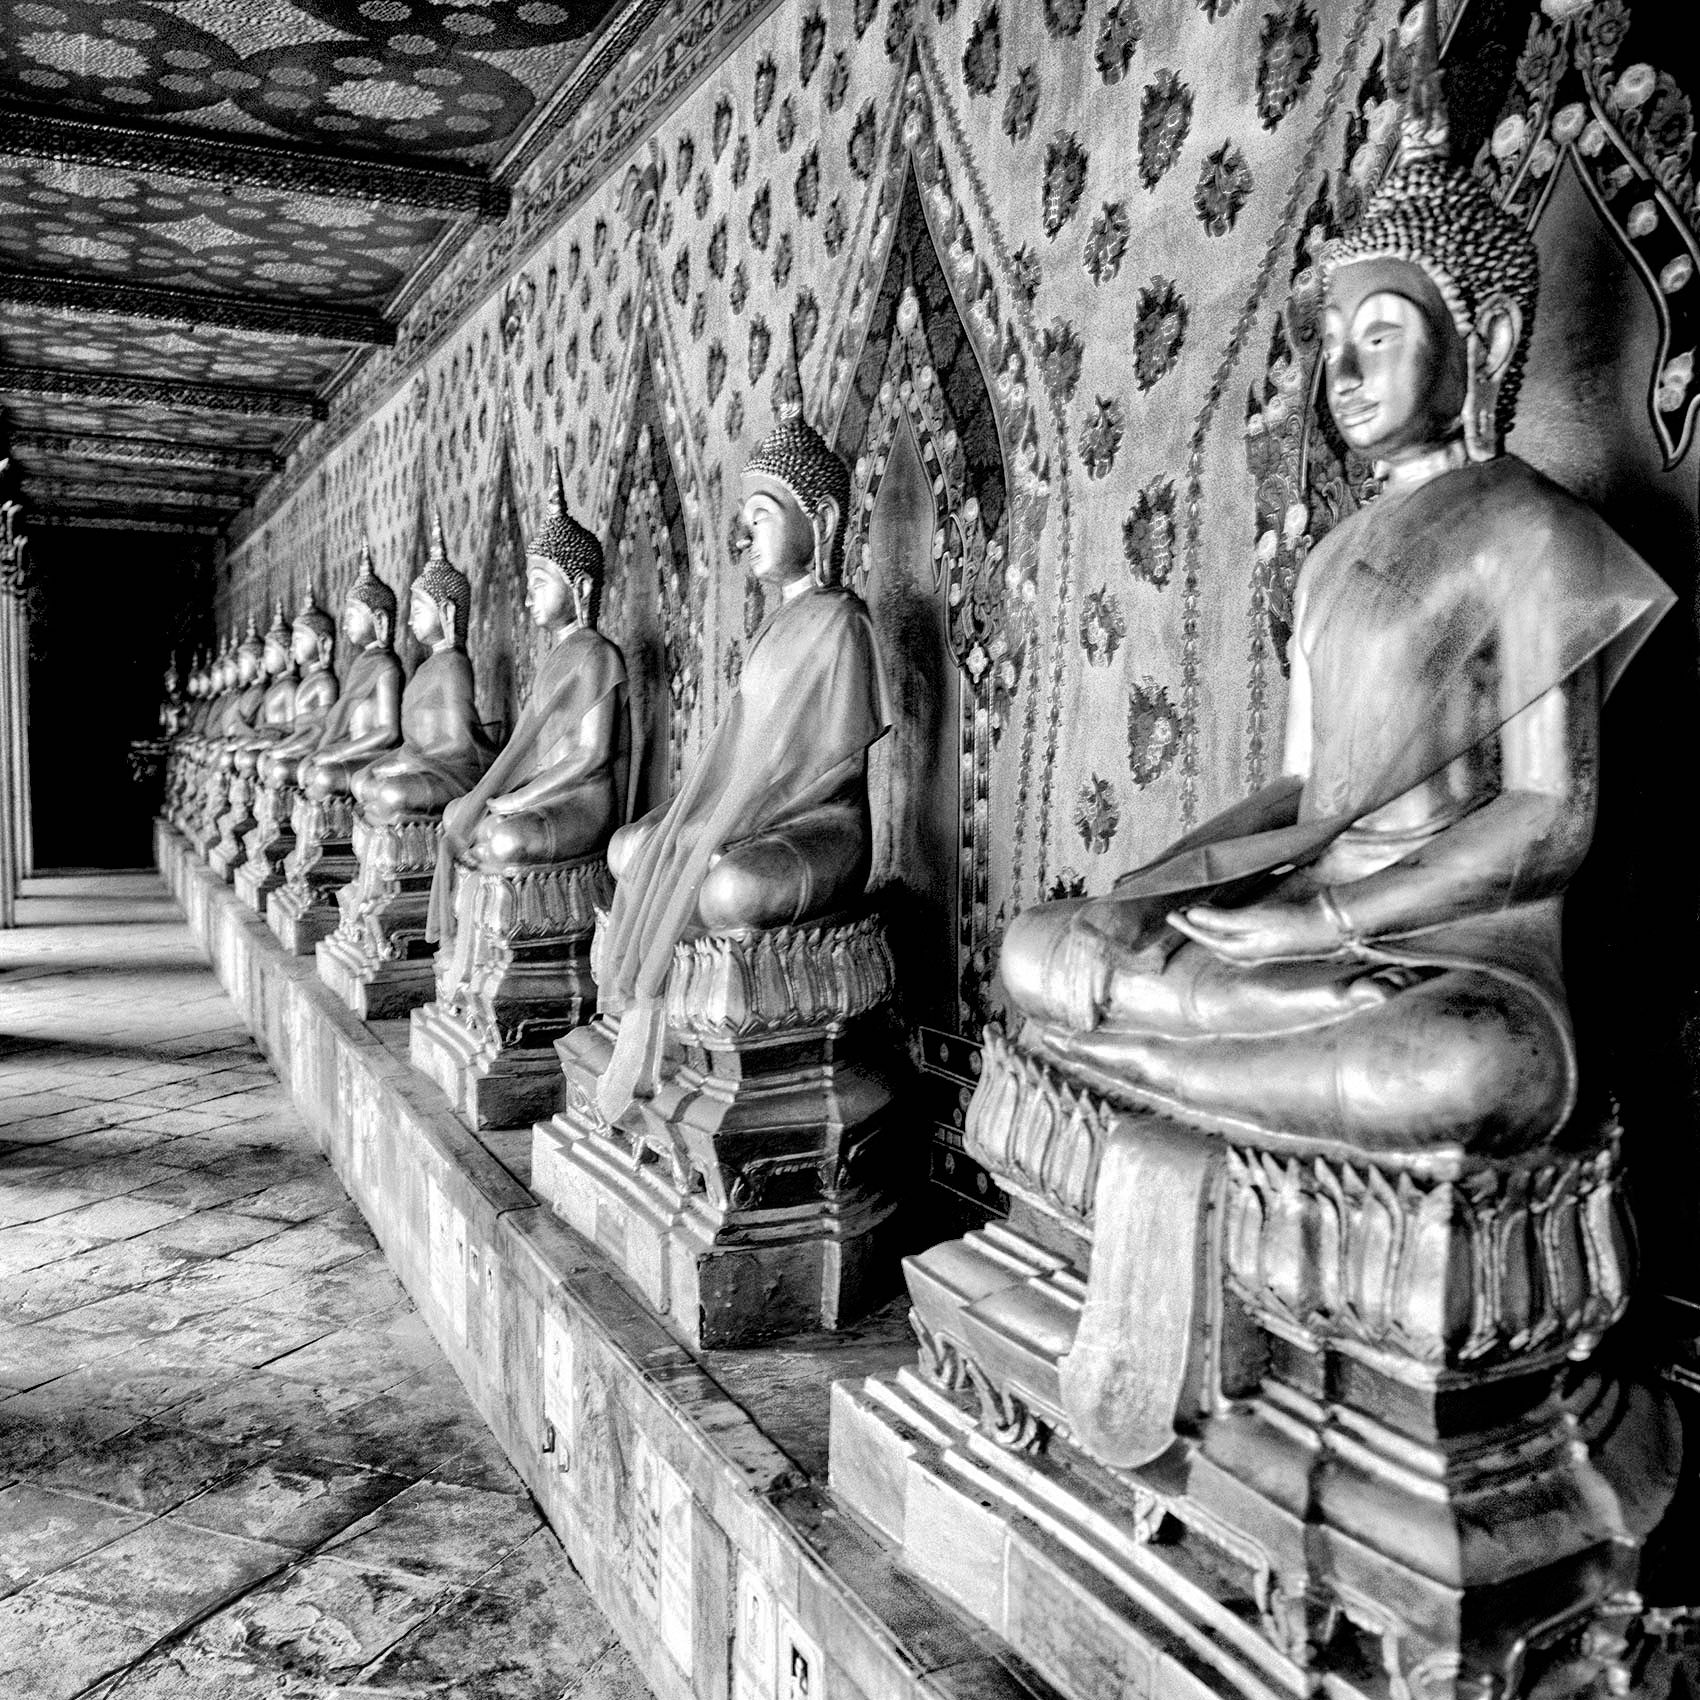 statues-of-buddha-line-up-in-a-row-at-a-temple-in-bangkok-thailand